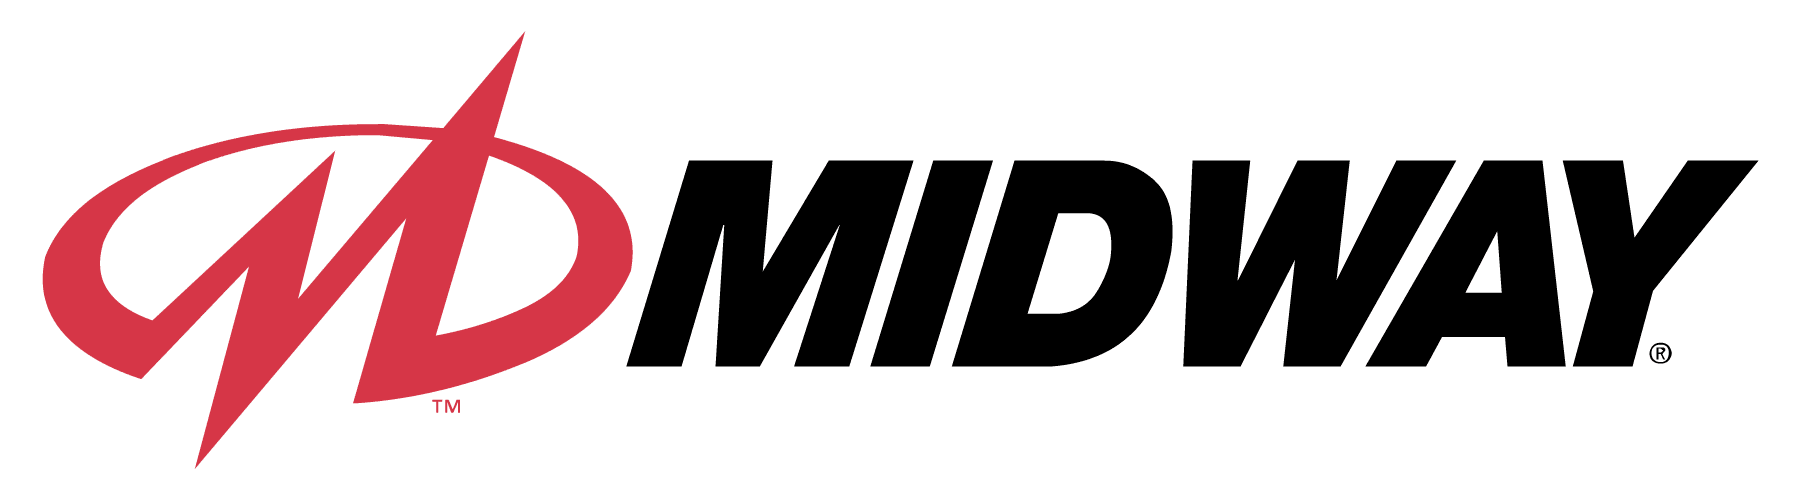 Midway_logo.png